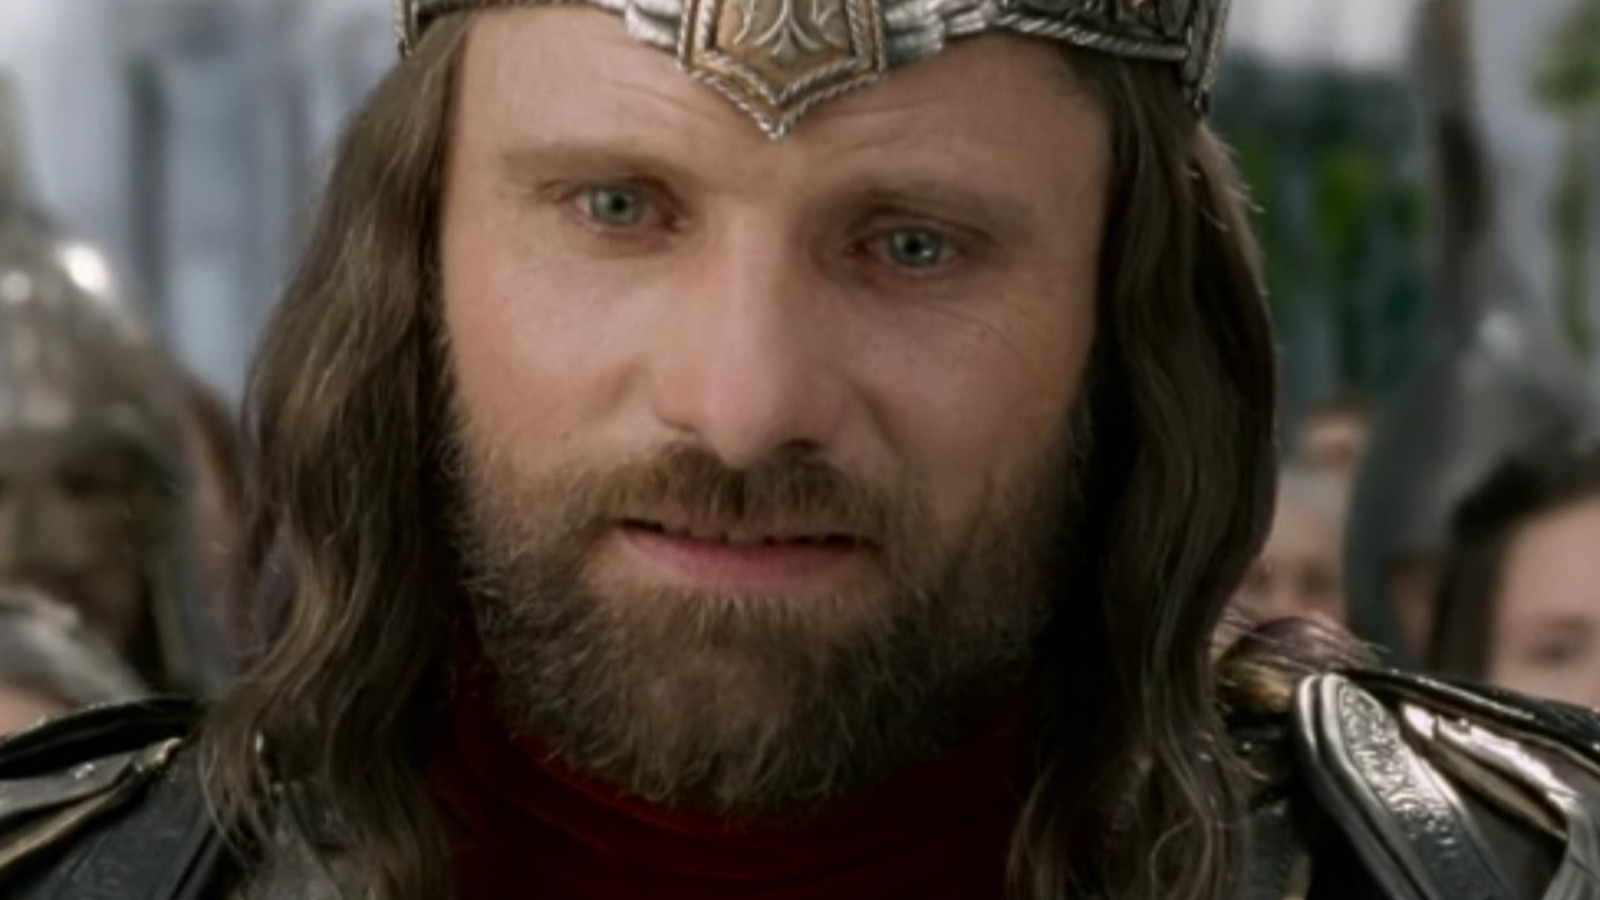 Tillid Motherland Opgive How Long Did Lord Of The Ring's Gondor Go Without A King?